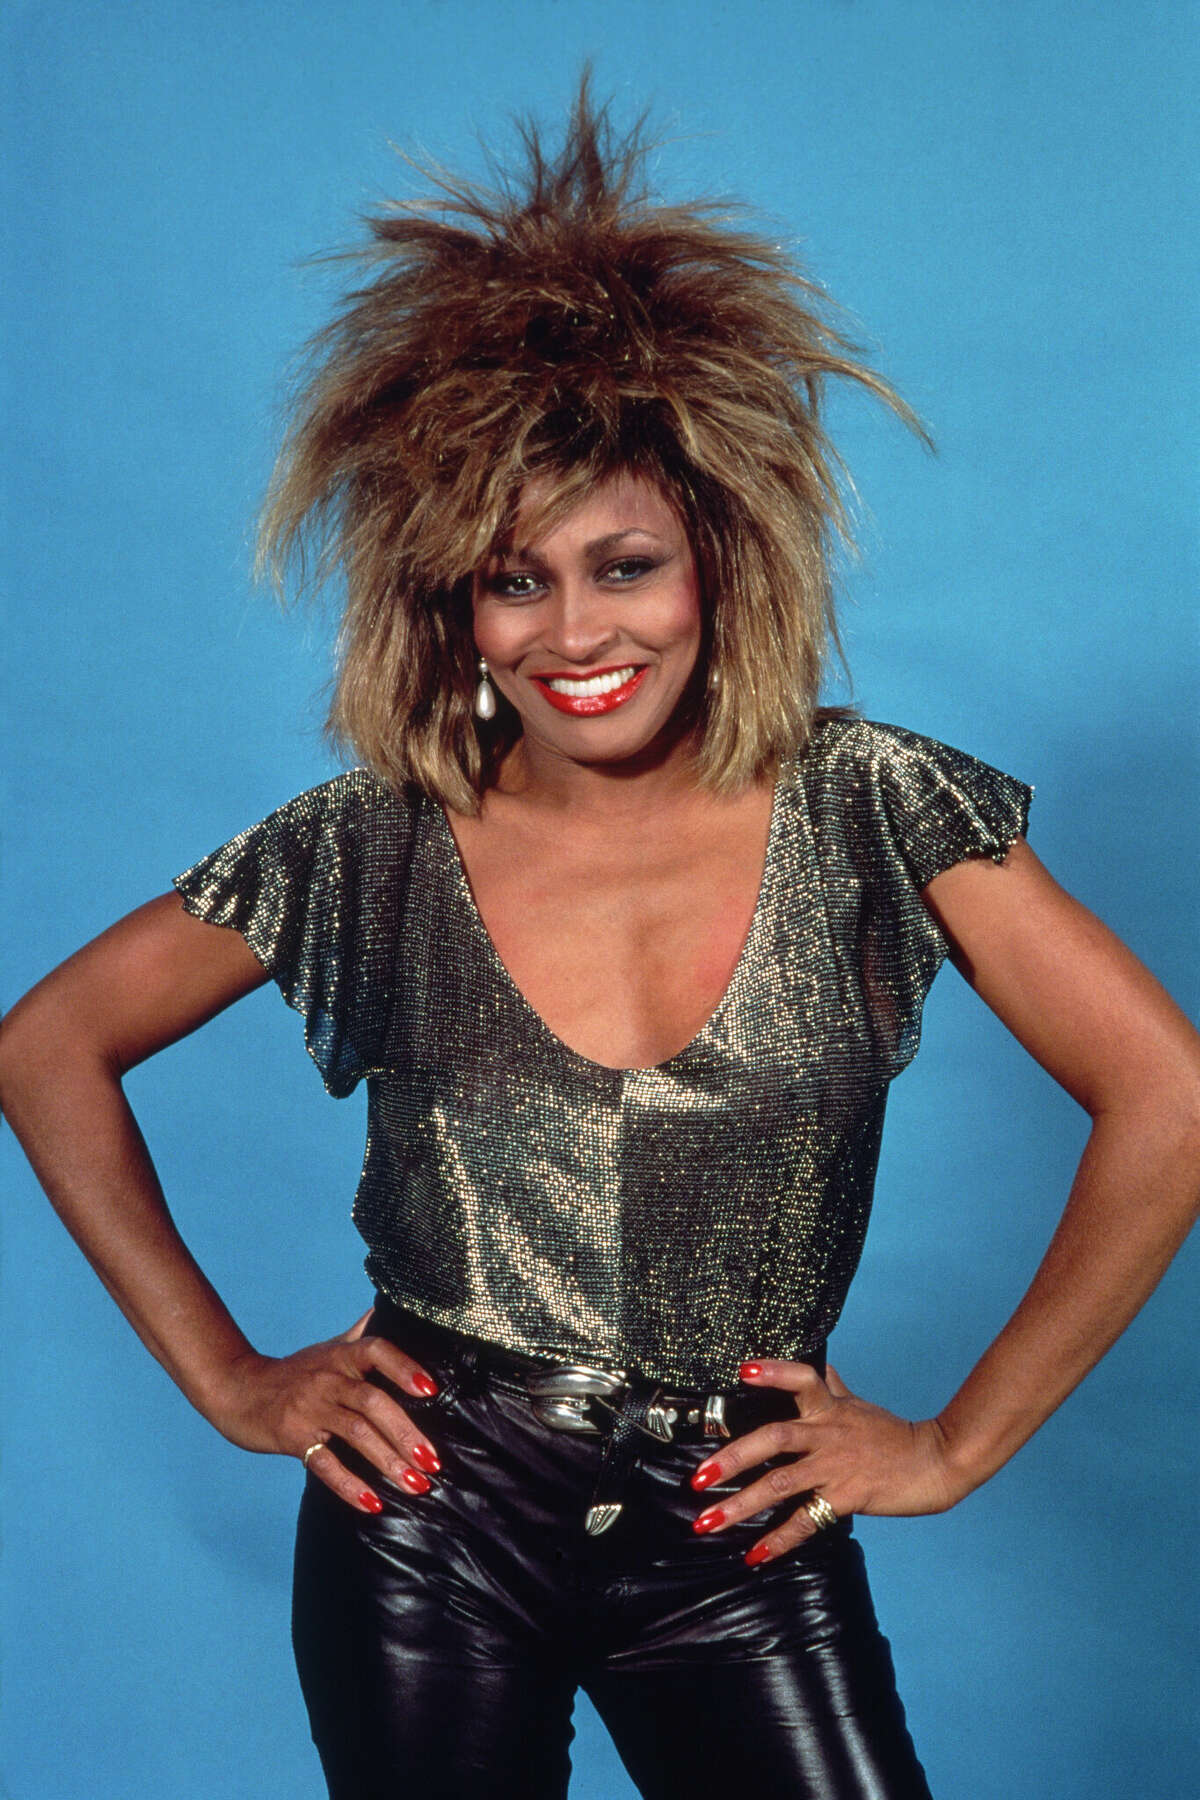 Tina Turner poses during a photoshoot. She is wearing a sparkling top with an '80s style haircut.